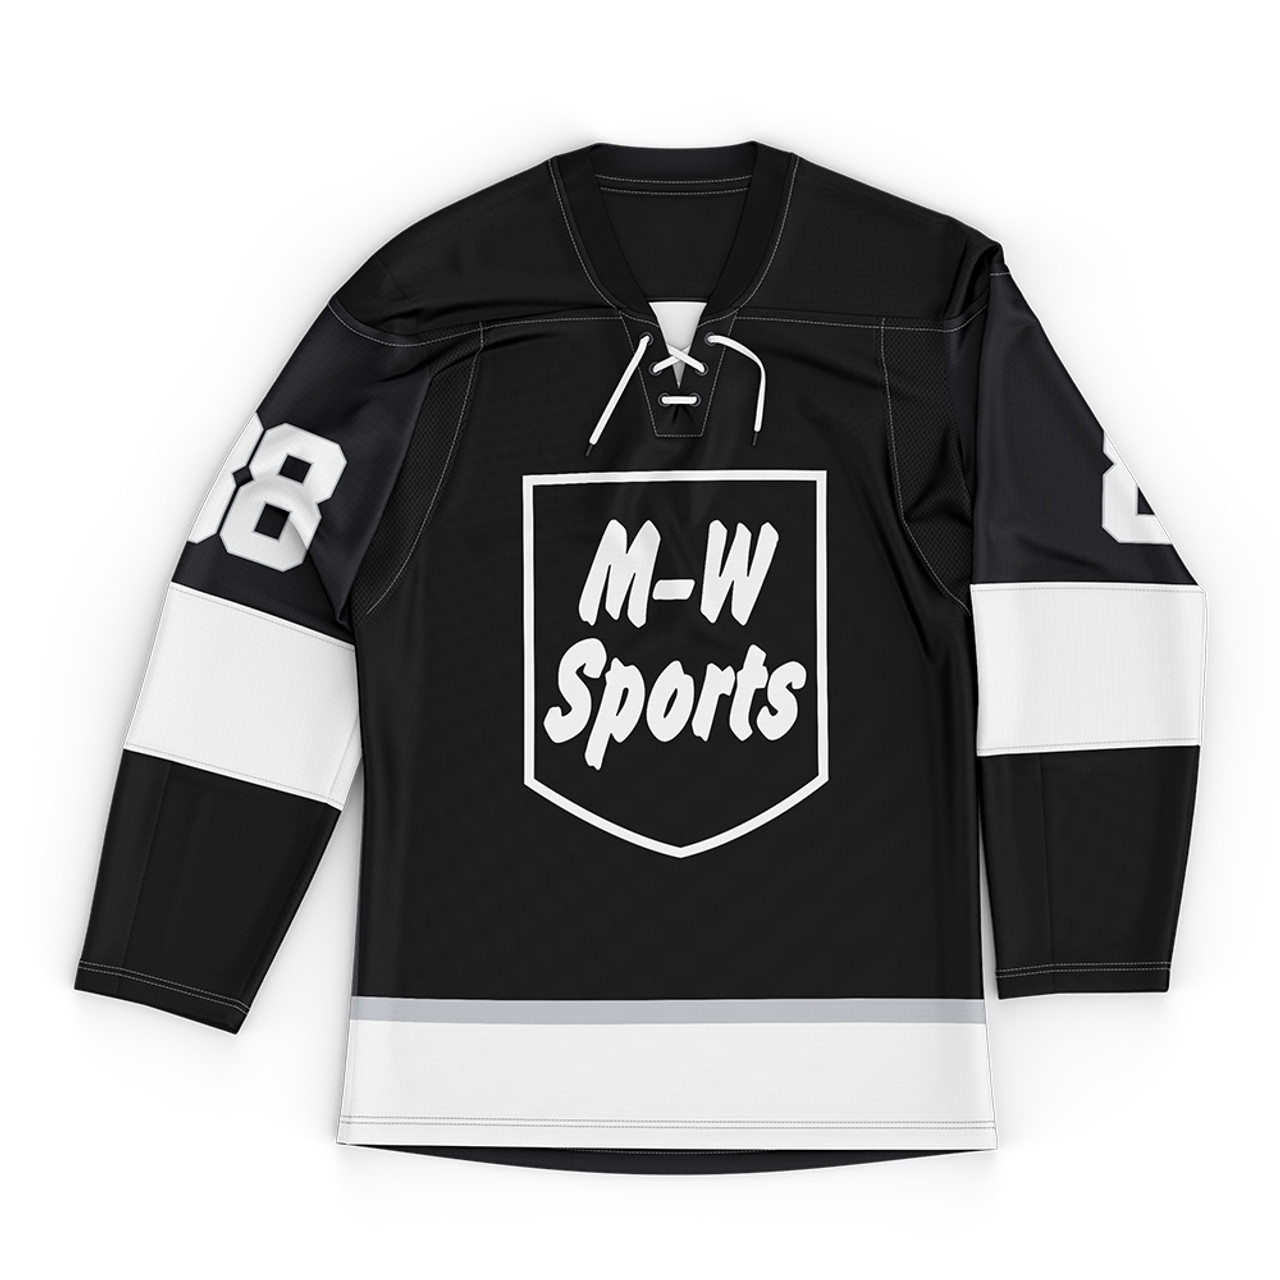  Vipers (White and Black) Hockey Jerseys - We are Ready to  Customize with Your Name and Number (Black, Youth XL) : Clothing, Shoes &  Jewelry